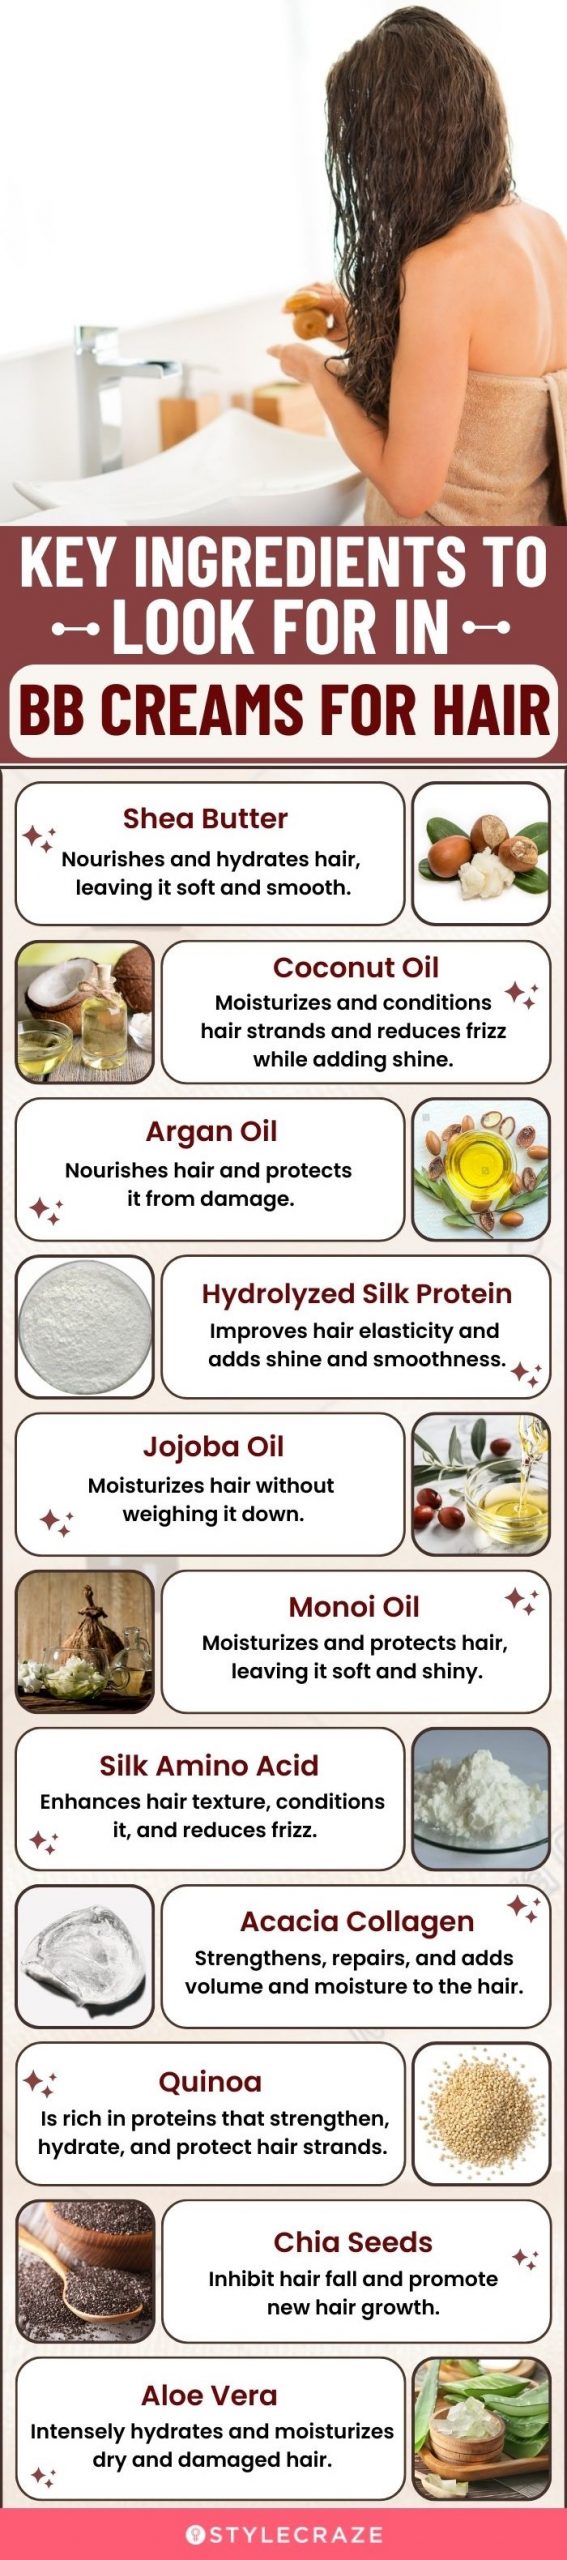 Key Ingredients To Look For In BB Creams For Hair (infographic)